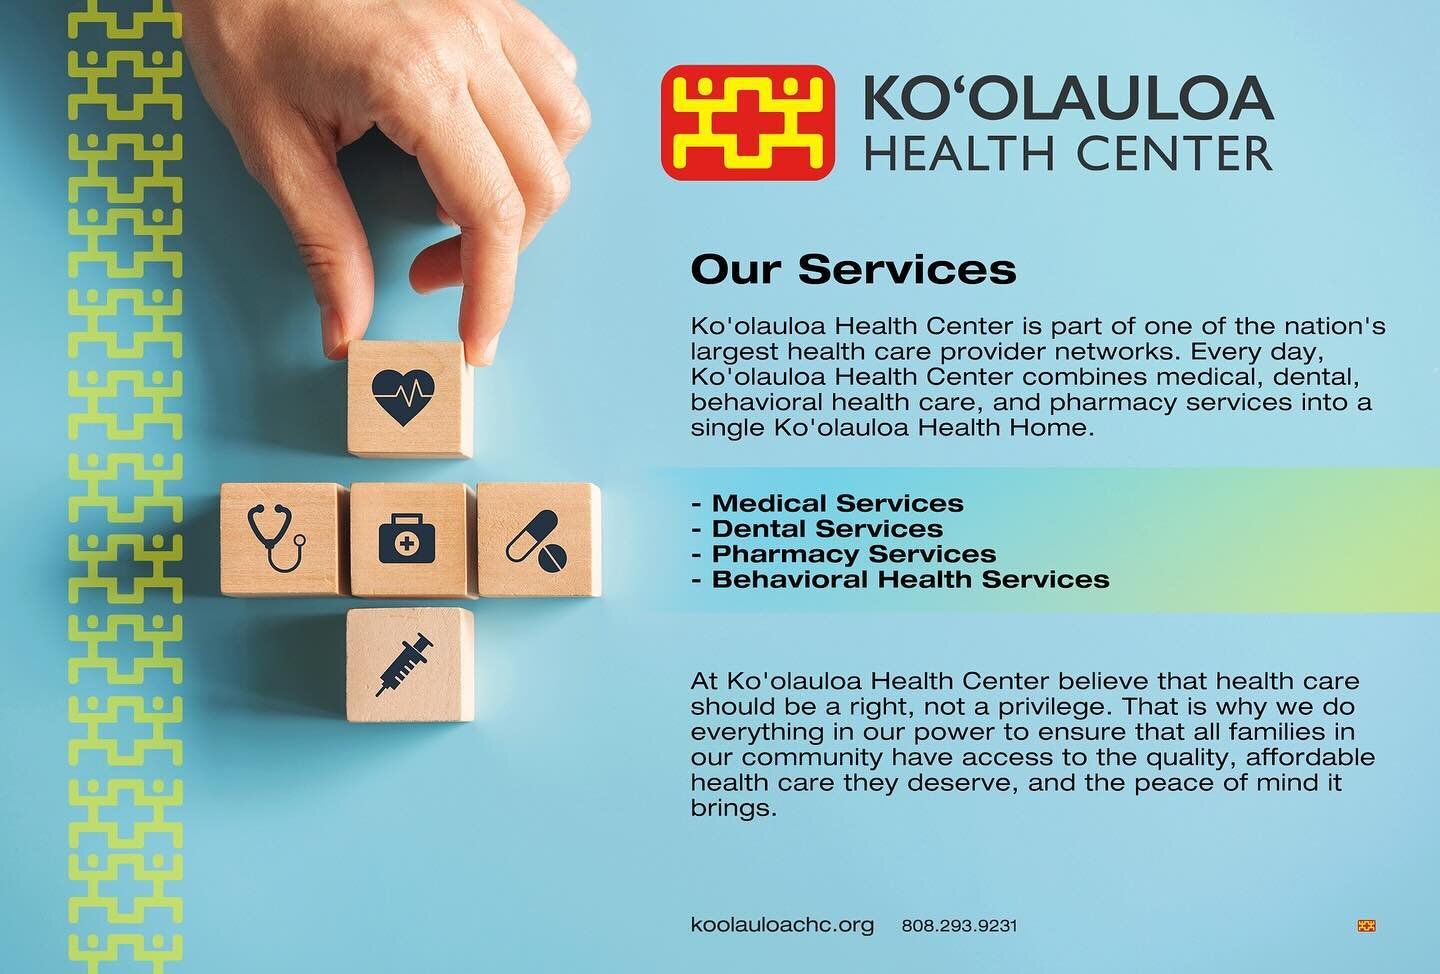 Aloha &lsquo;Ohana!

Ko&rsquo;olauloa Health Center is part of one of the nation&rsquo;s largest healthcare provider networks. Every day, Ko&rsquo;olauloa Health Center combines medical, dental, behavioral health care, and pharmacy services into a si